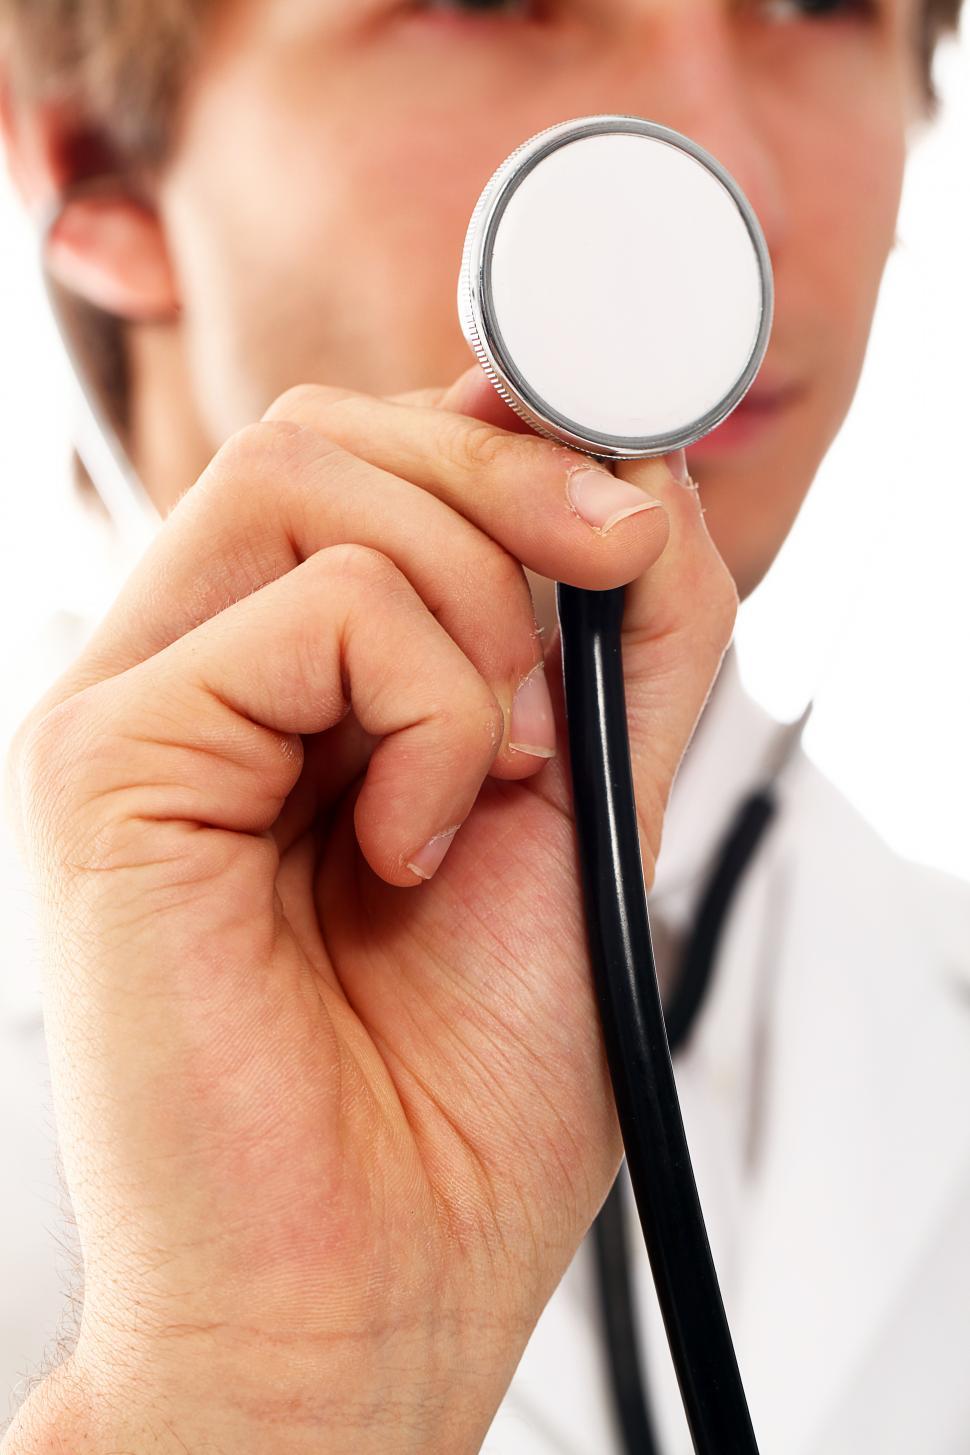 Free Image of Stethoscope in the hands of a medica professional 